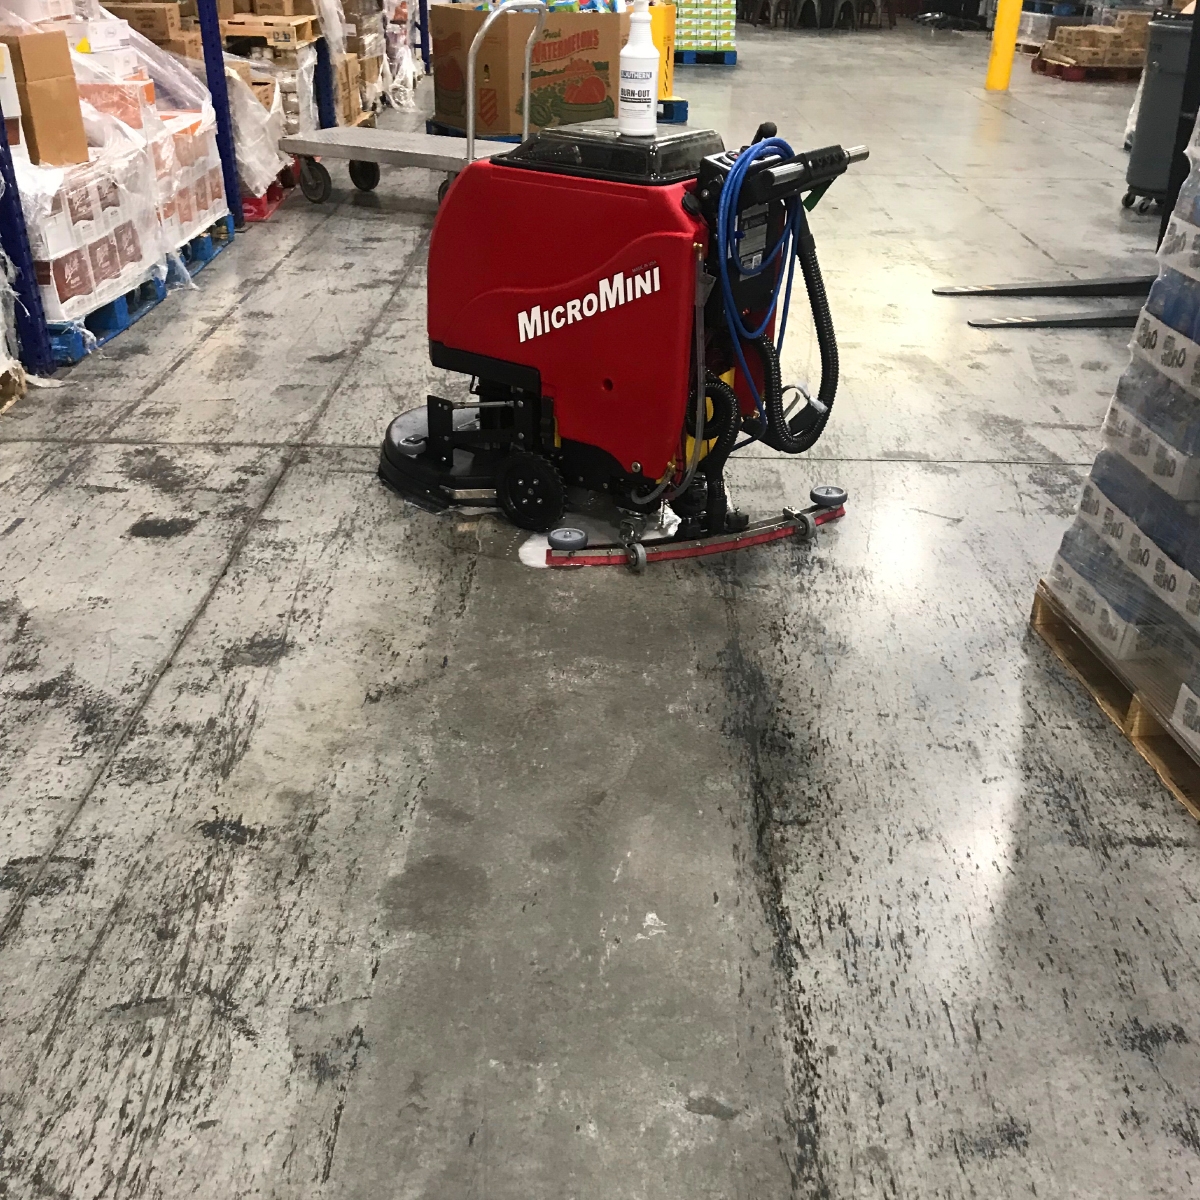 MicroMini cleaning heavy tire marks off of dirty floor in auto garage